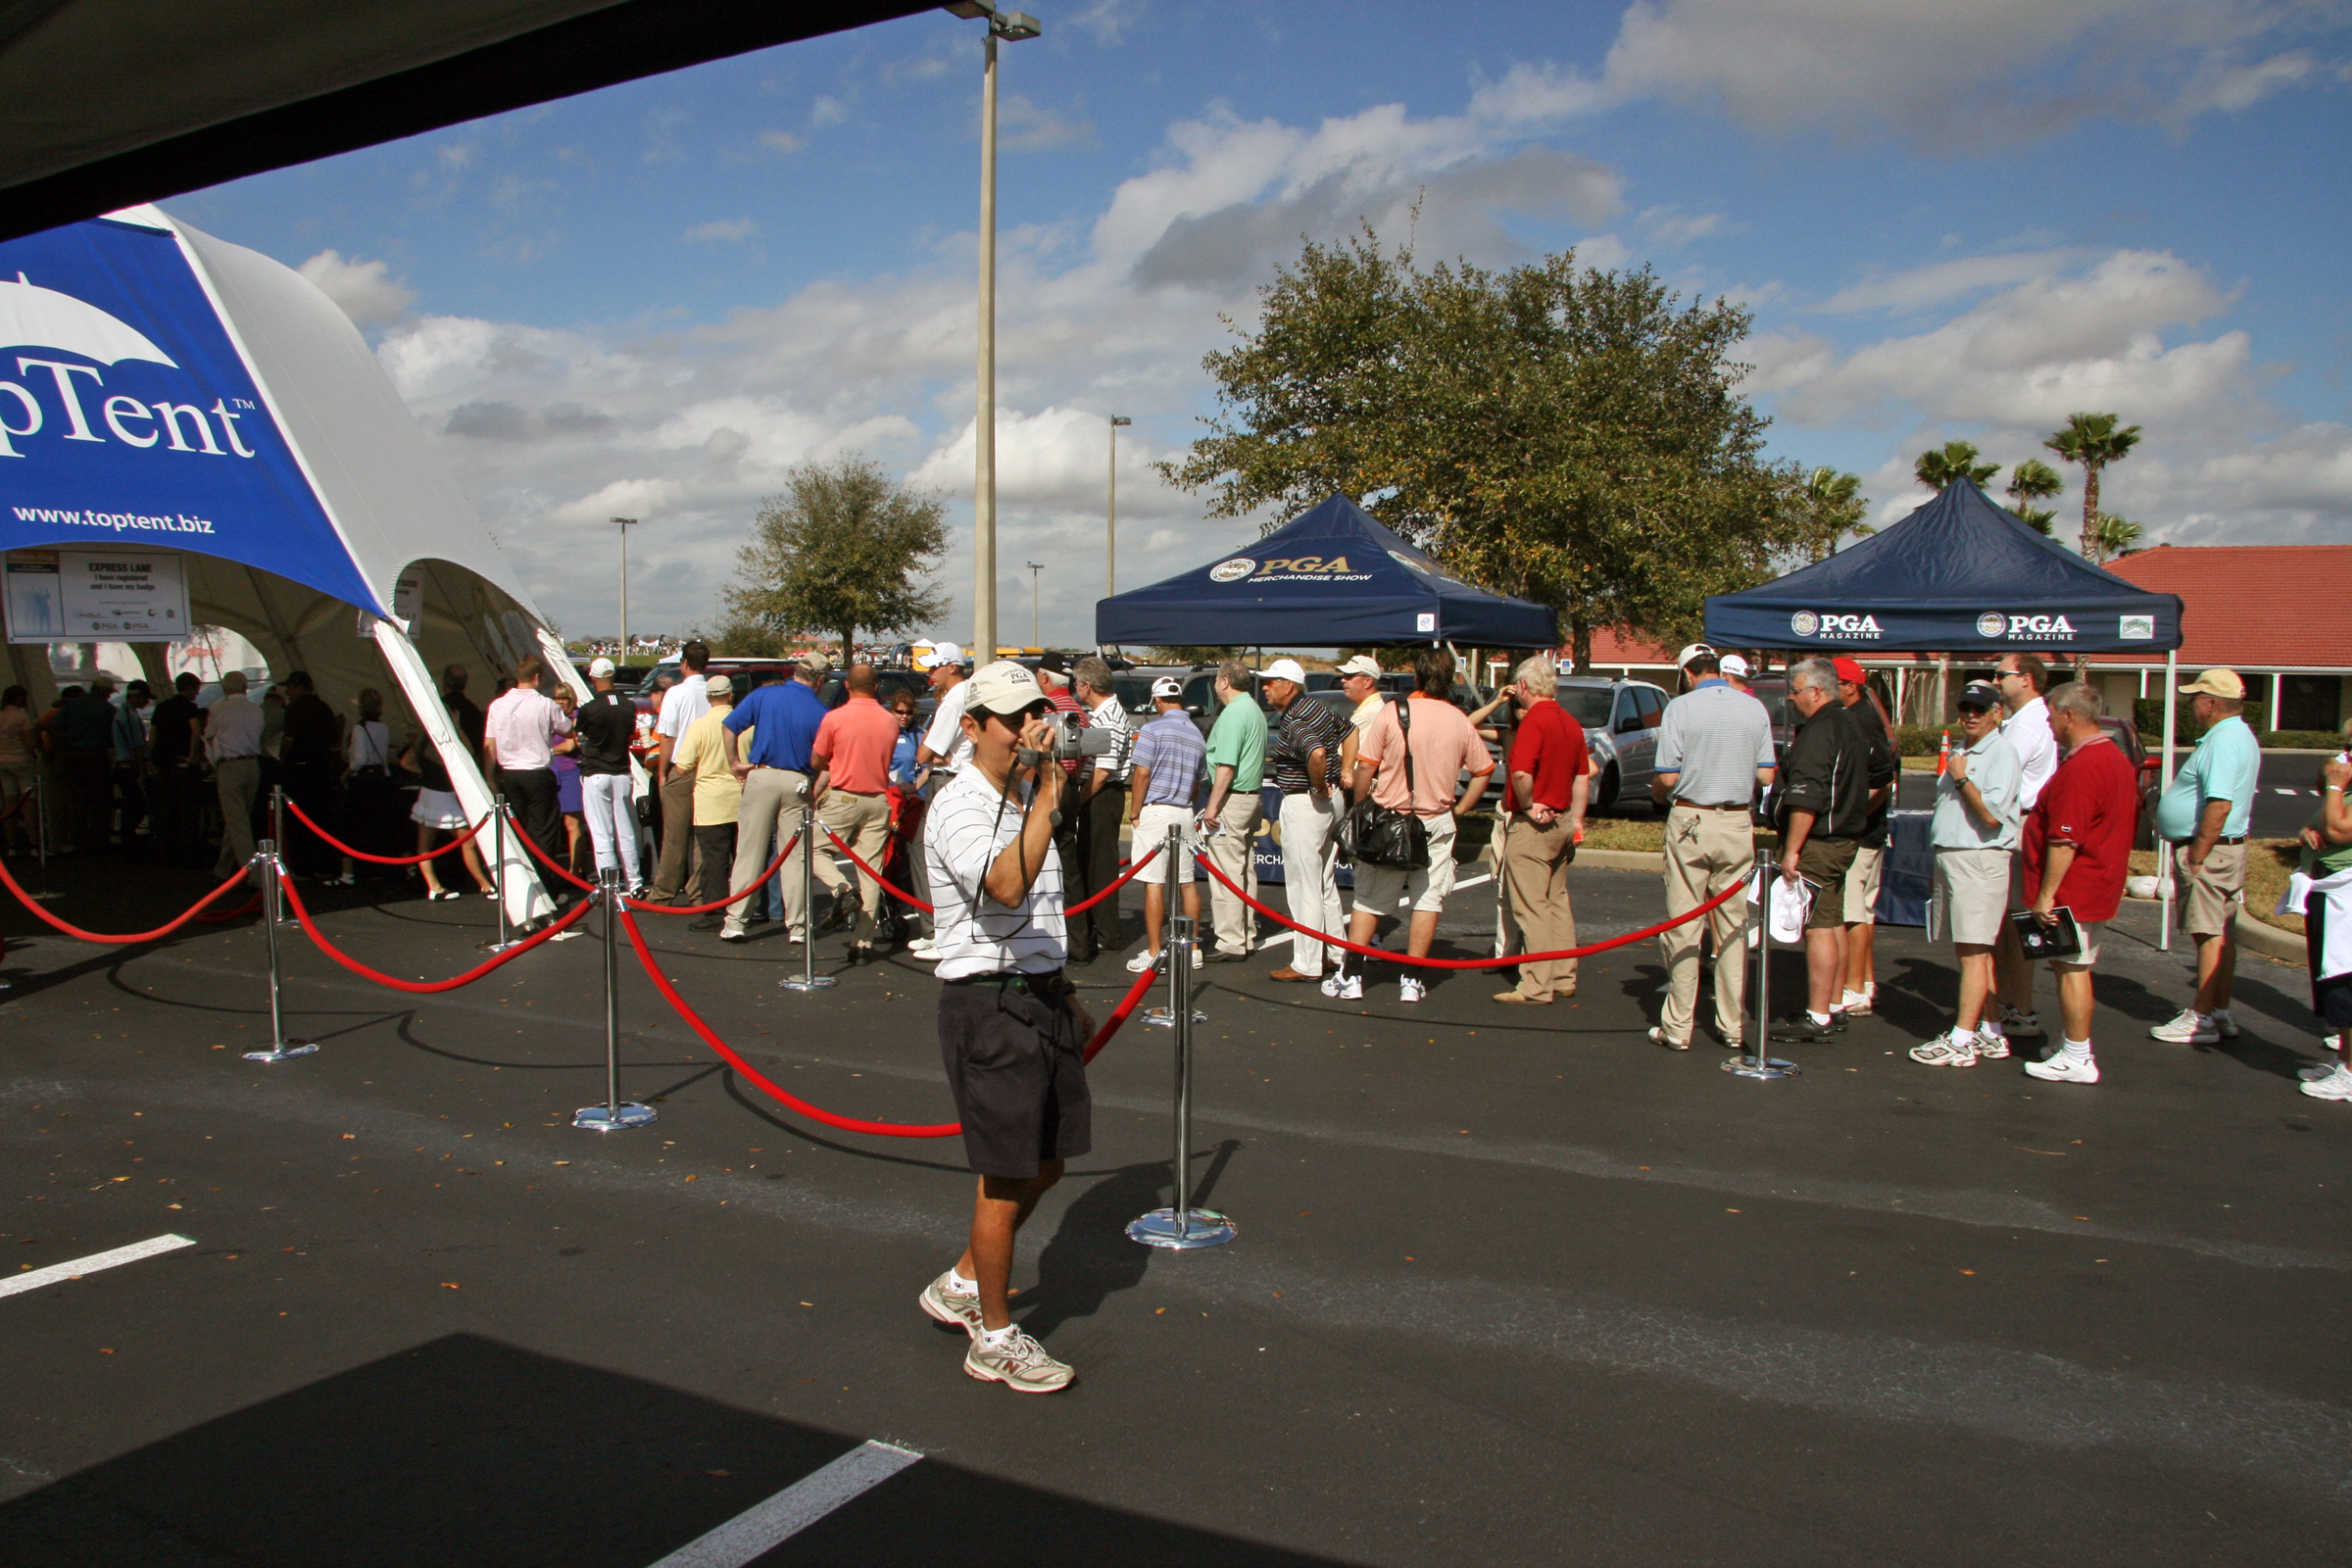 Demo Day at the PGA Merchandise Show, 2009.